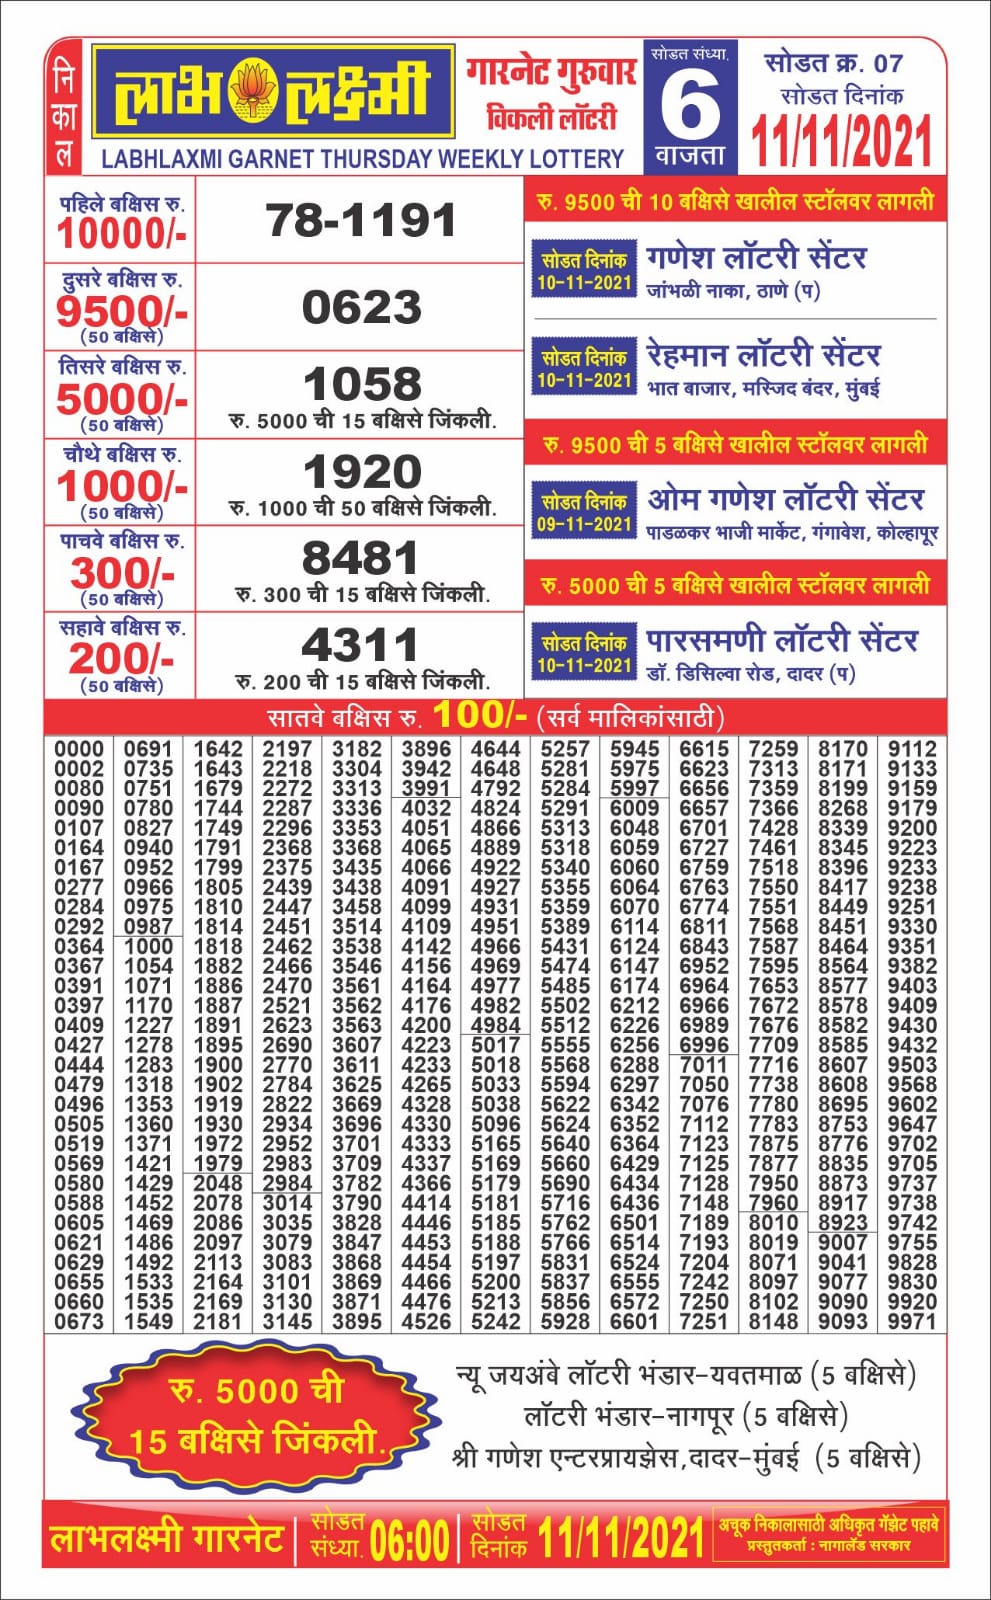 Labhlaxmi 6pm Lottery Result 11.11.2021